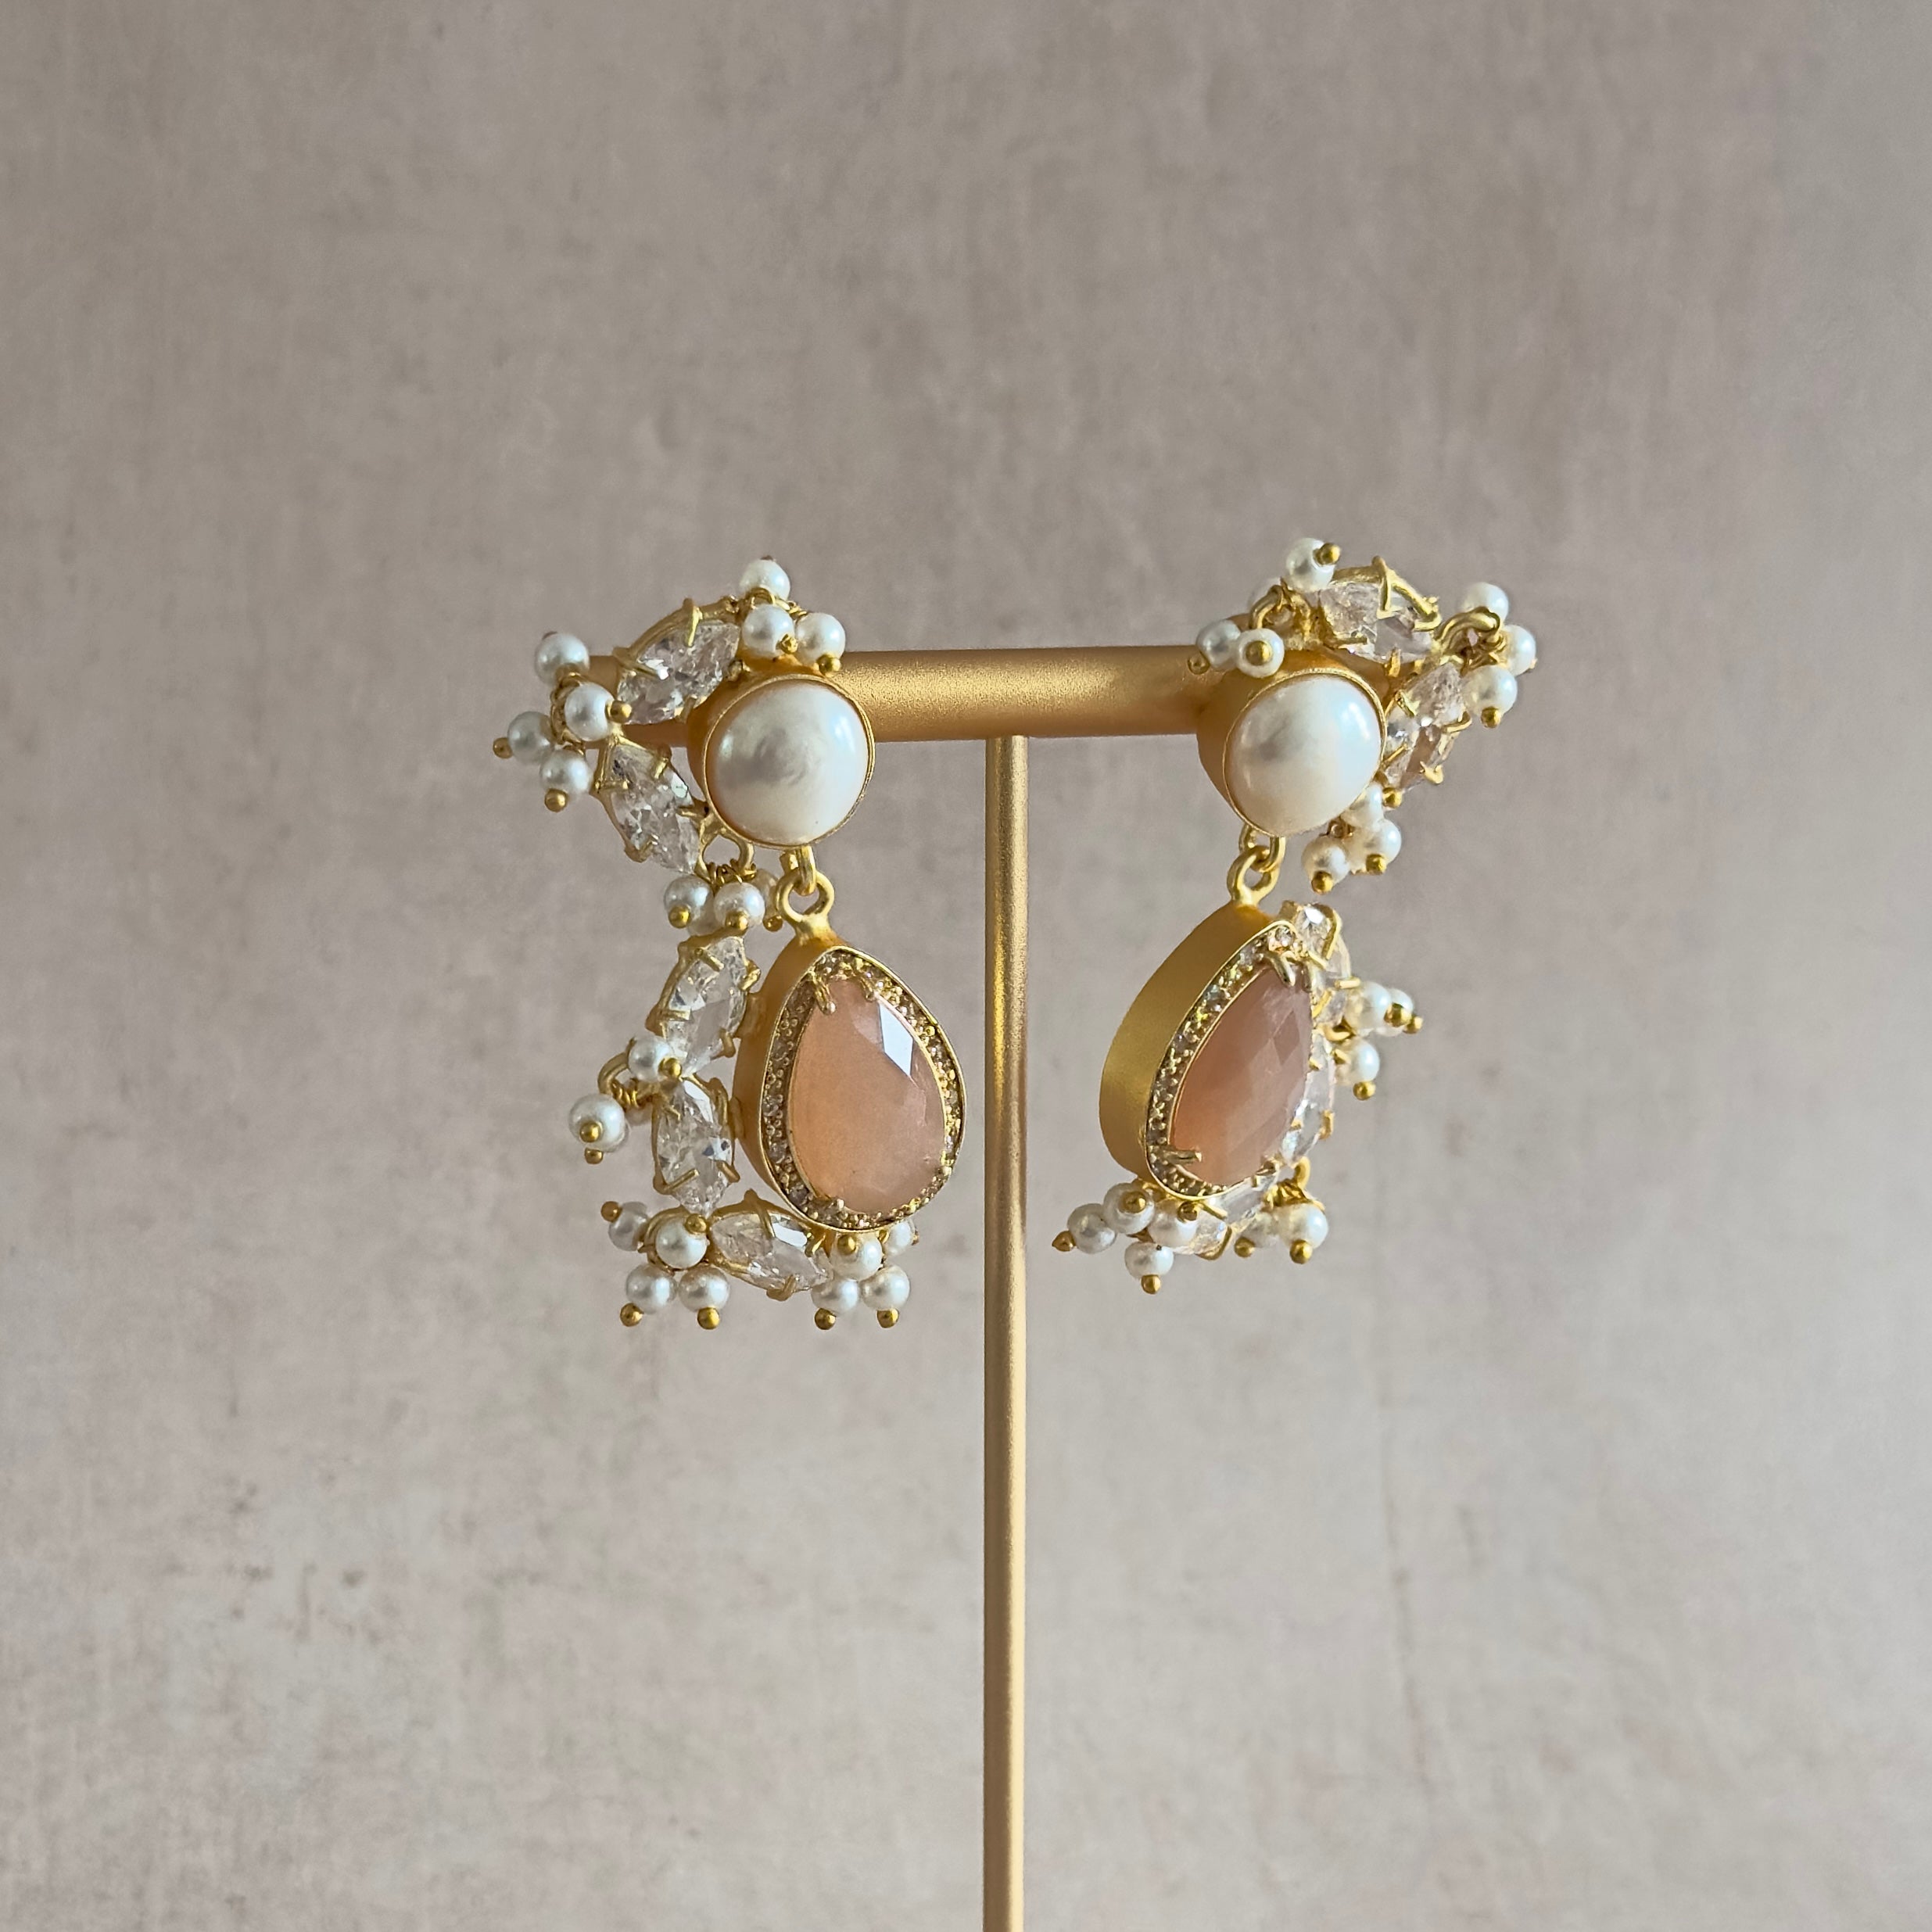 Transform your look with our Peachy Pearl Drop Earrings! Each piece is delicately crafted with peach moonstone and freshwater pearls to add a touch of elegance and natural beauty to any outfit. Elevate your style and embrace the benefits of these stunning earrings.